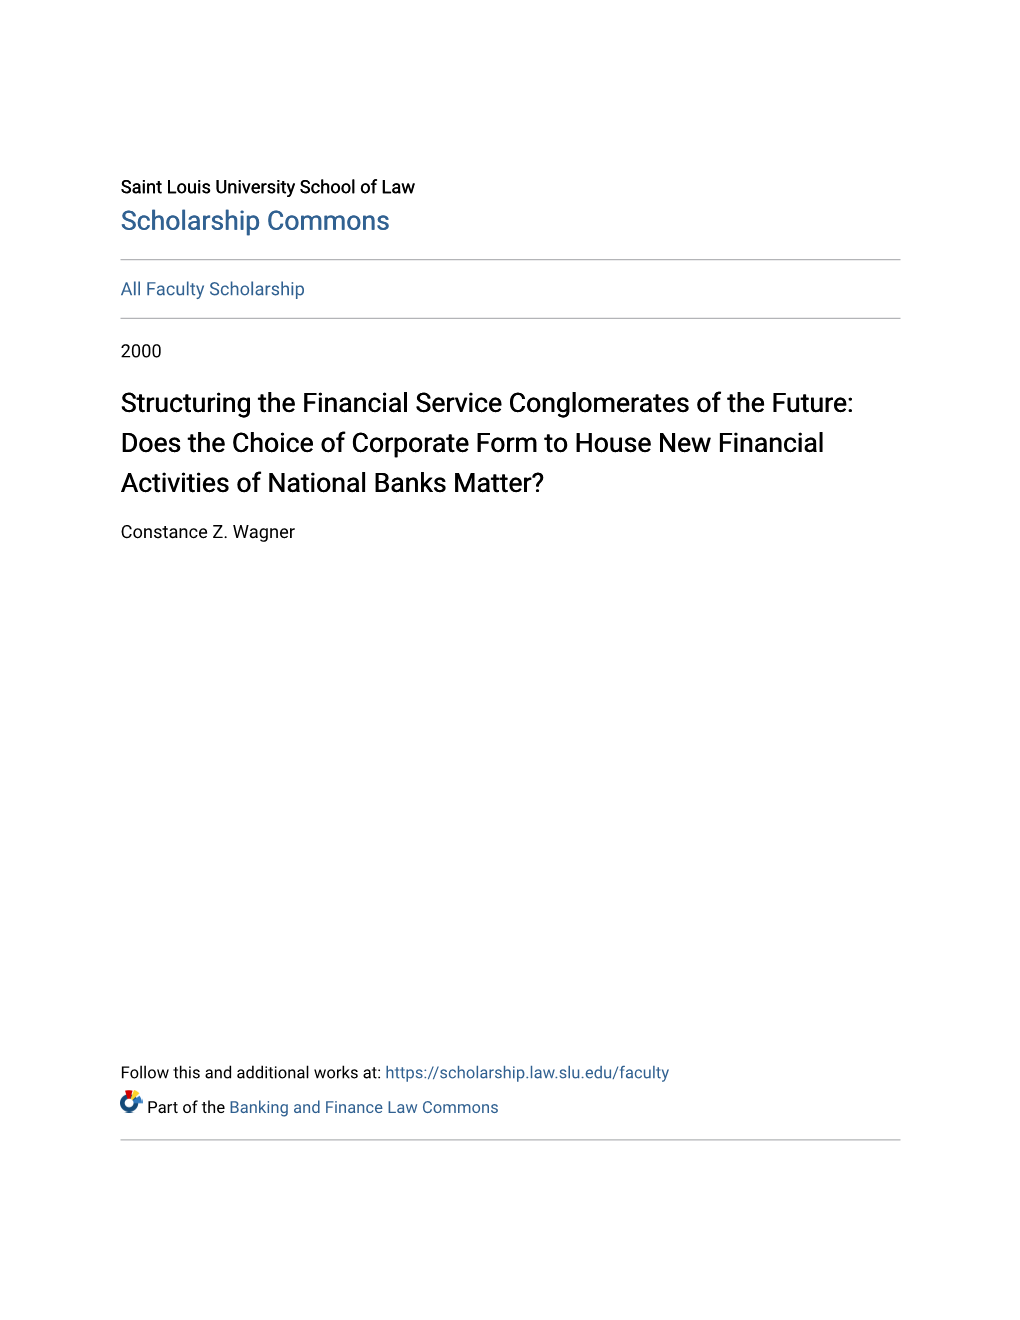 Structuring the Financial Service Conglomerates of the Future: Does the Choice of Corporate Form to House New Financial Activities of National Banks Matter?